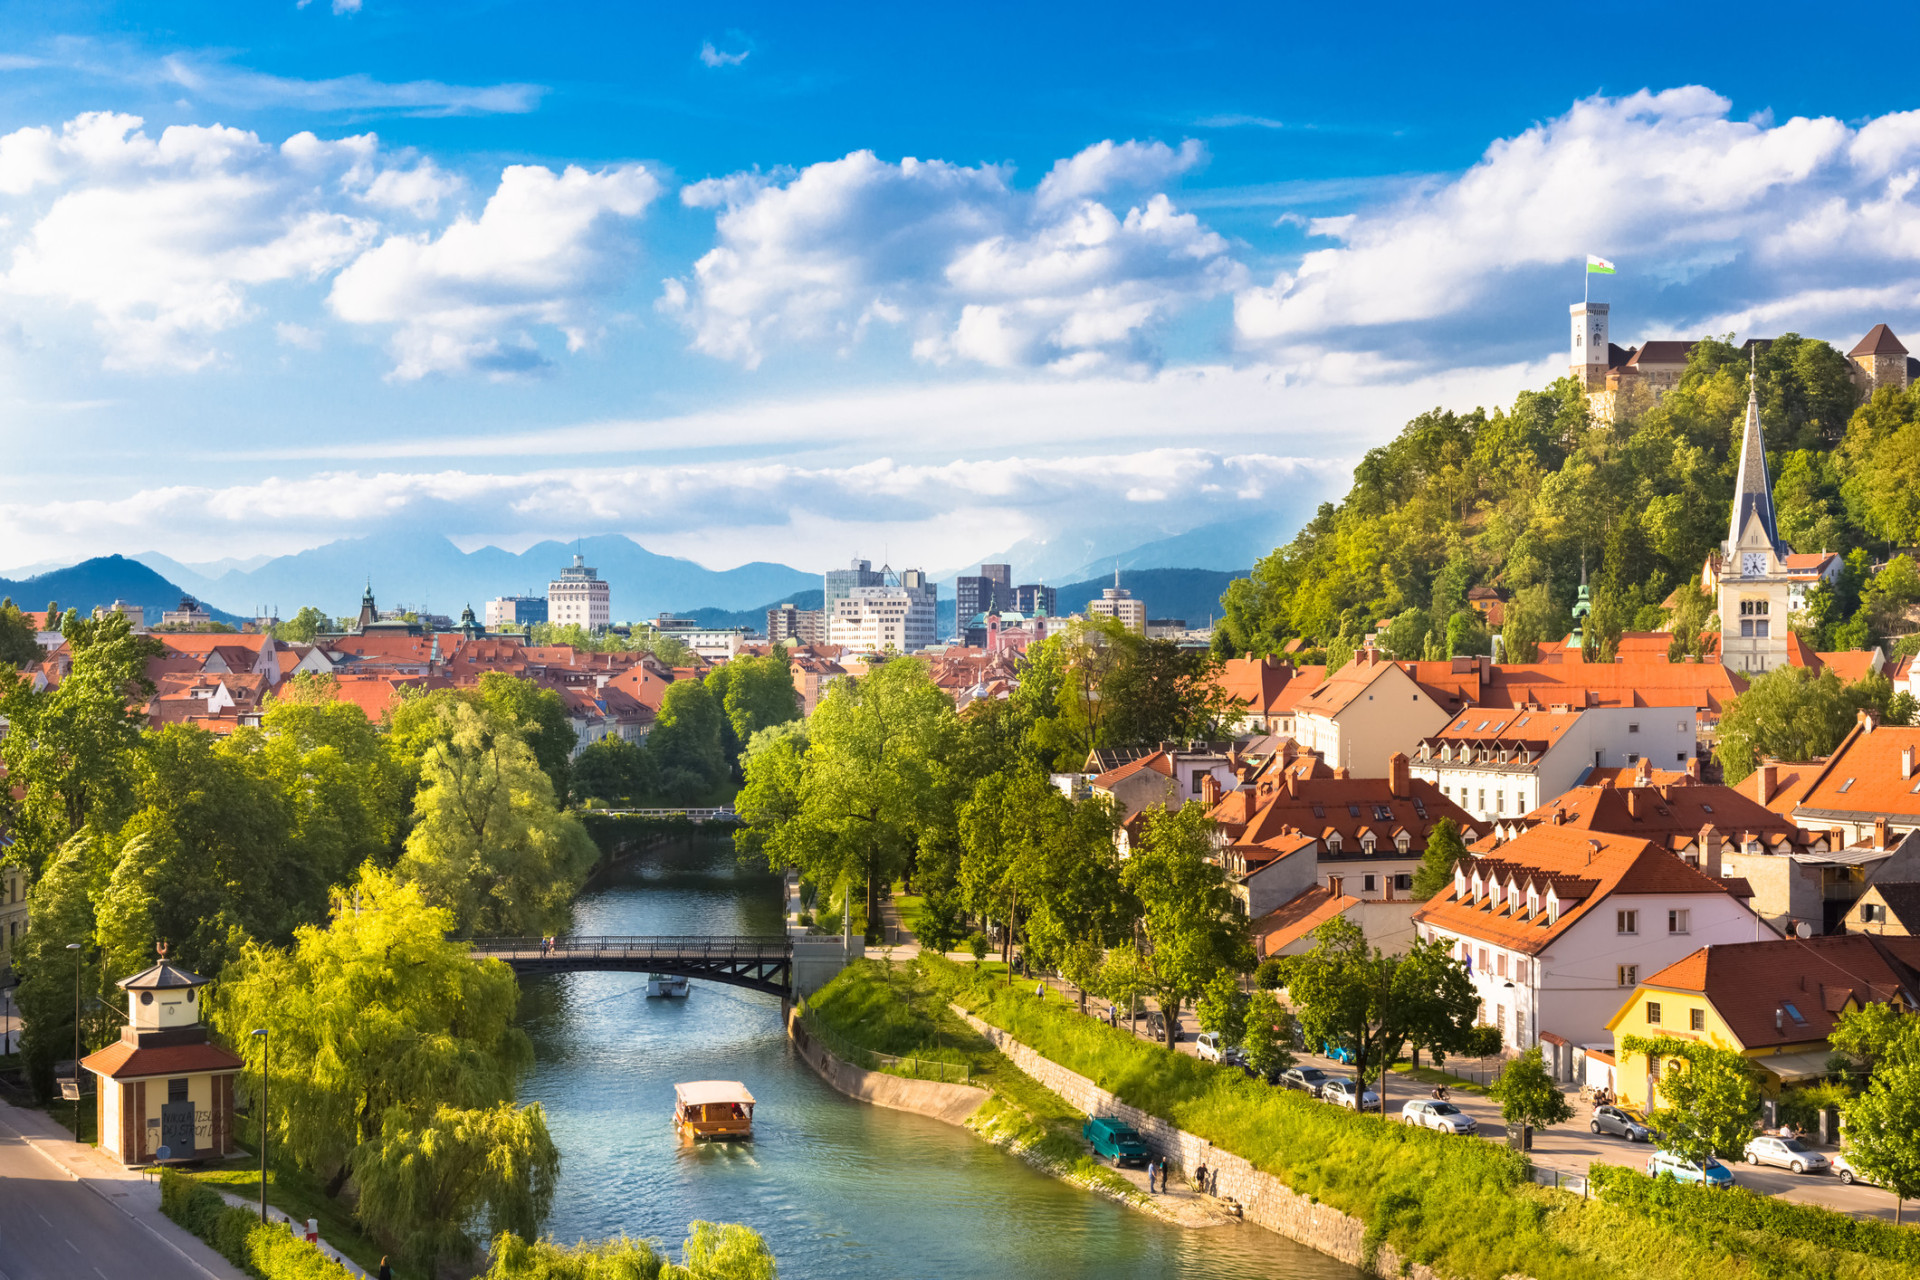 <p>Score: 6.743</p> <p>Coming in at number 21 is this beautiful Eastern European jewel. Slovenia is slowly climbing the ranking and has gone up one from 22nd to 21st in this year's ranking.</p><p><a href="https://www.msn.com/en-ca/community/channel/vid-7xx8mnucu55yw63we9va2gwr7uihbxwc68fxqp25x6tg4ftibpra?cvid=94631541bc0f4f89bfd59158d696ad7e">Follow us and access great exclusive content every day</a></p>